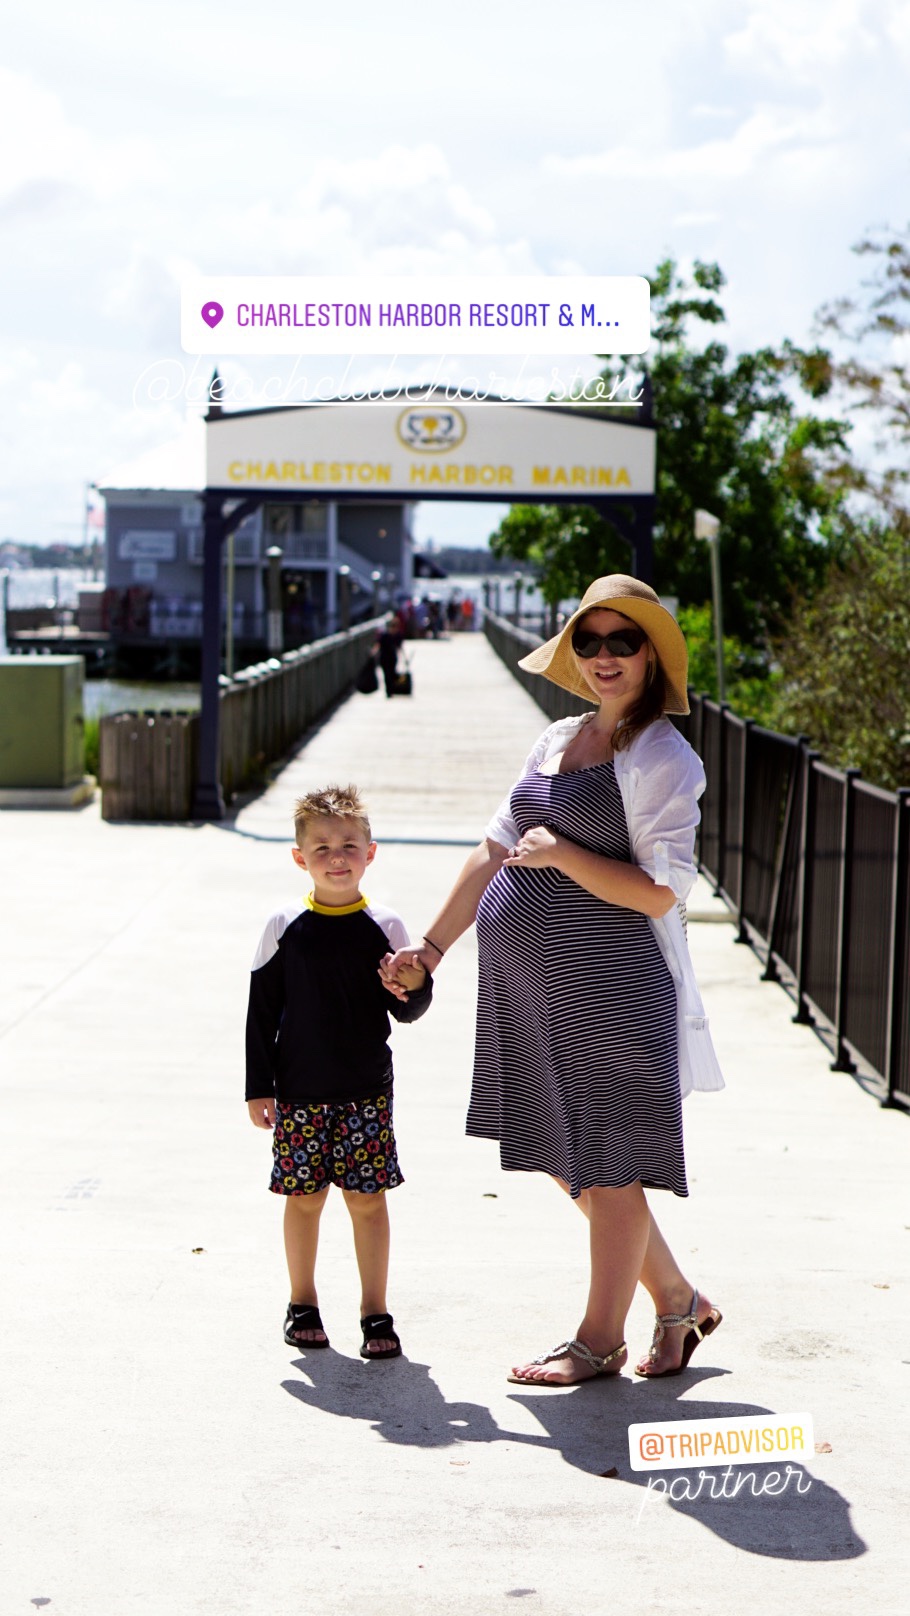 Charleston SC- Family travel South Carolina - family travel bloggers guide things to do in SC 